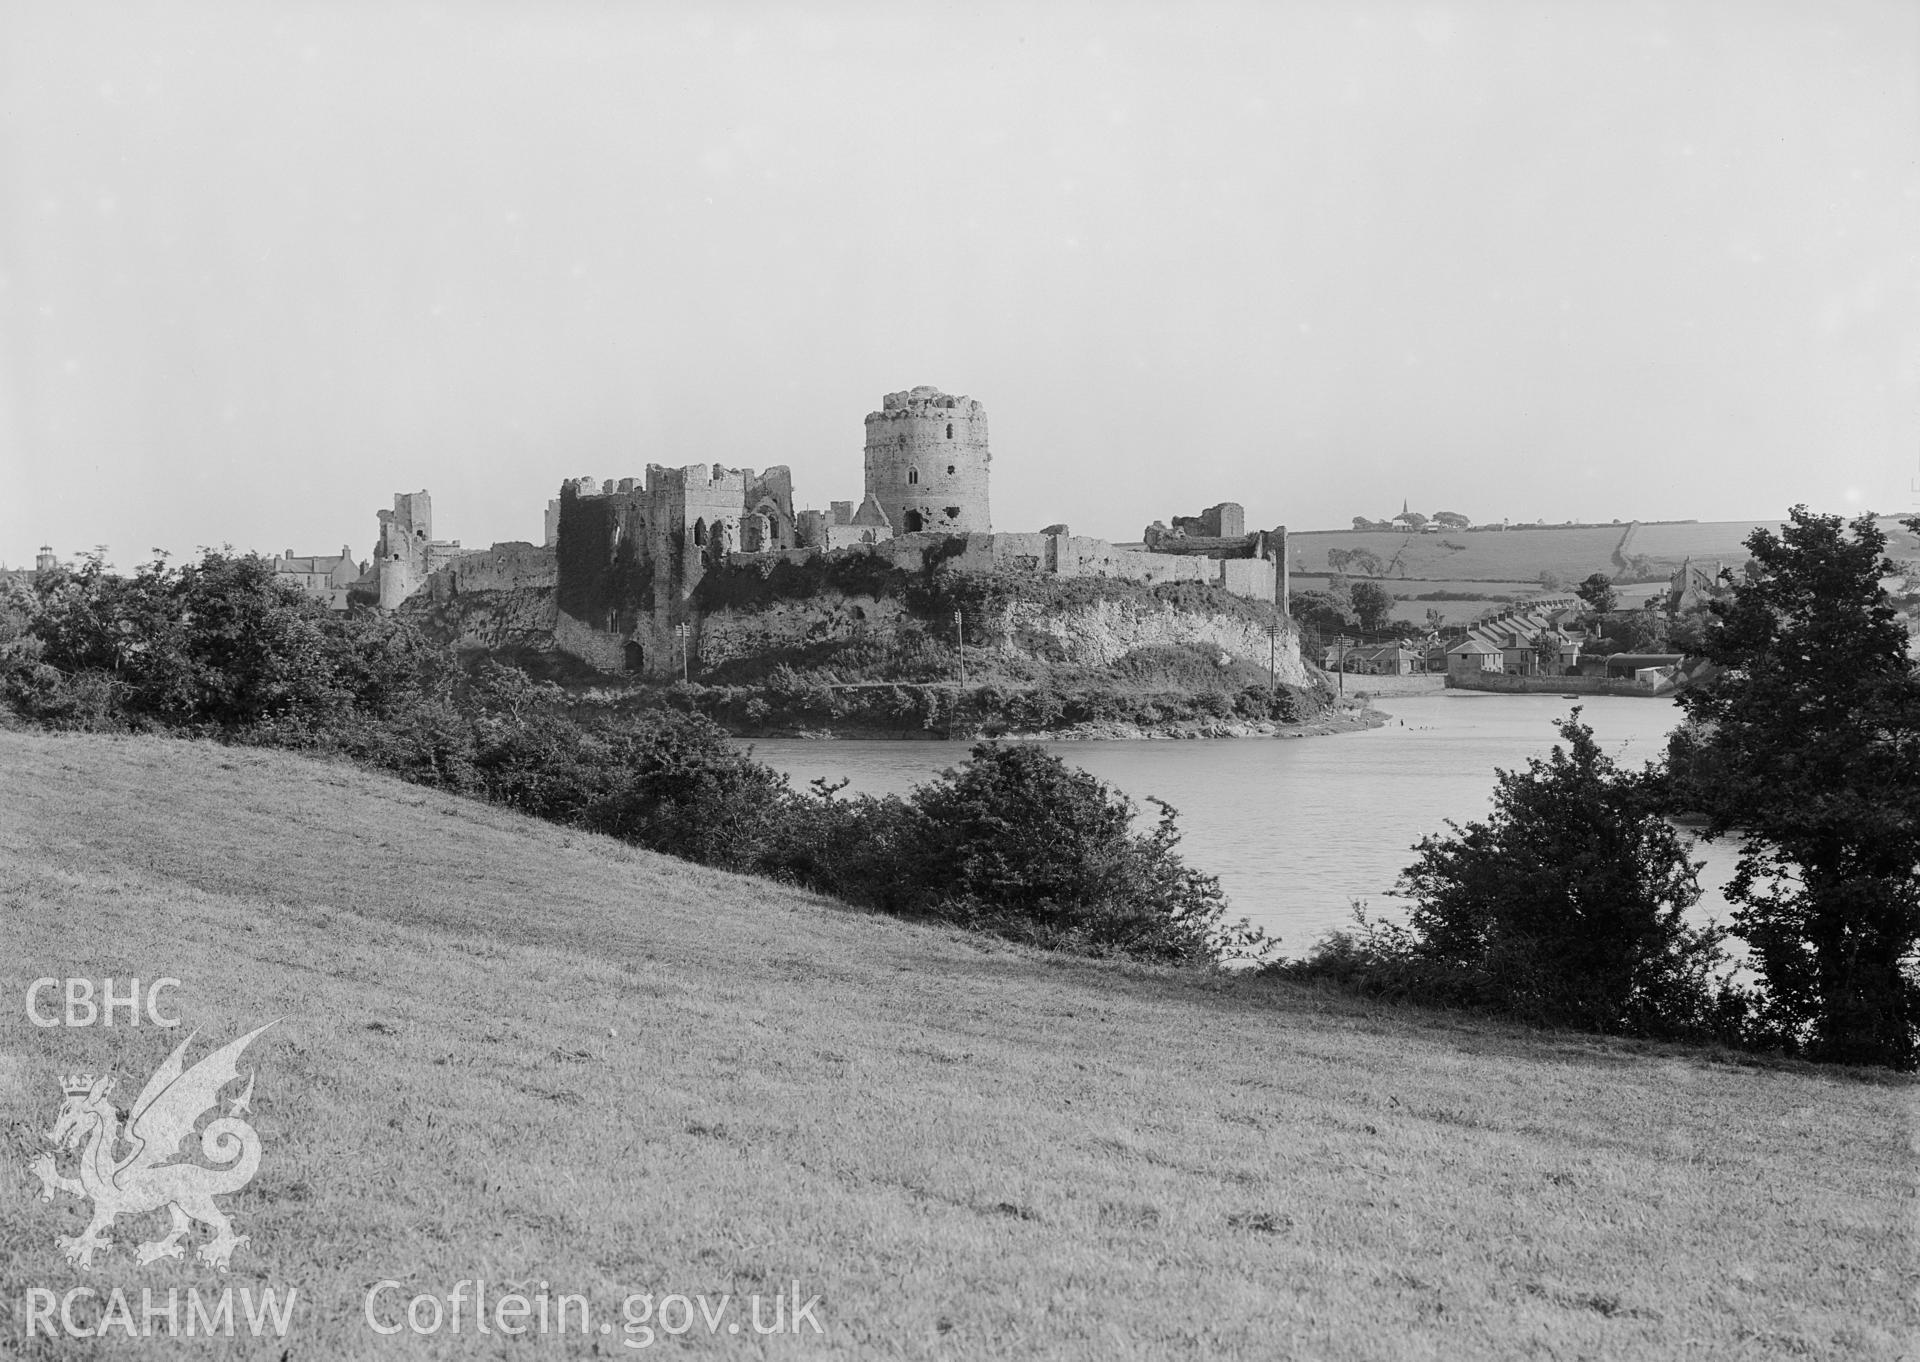 View of Pembroke Castle from the northwest.